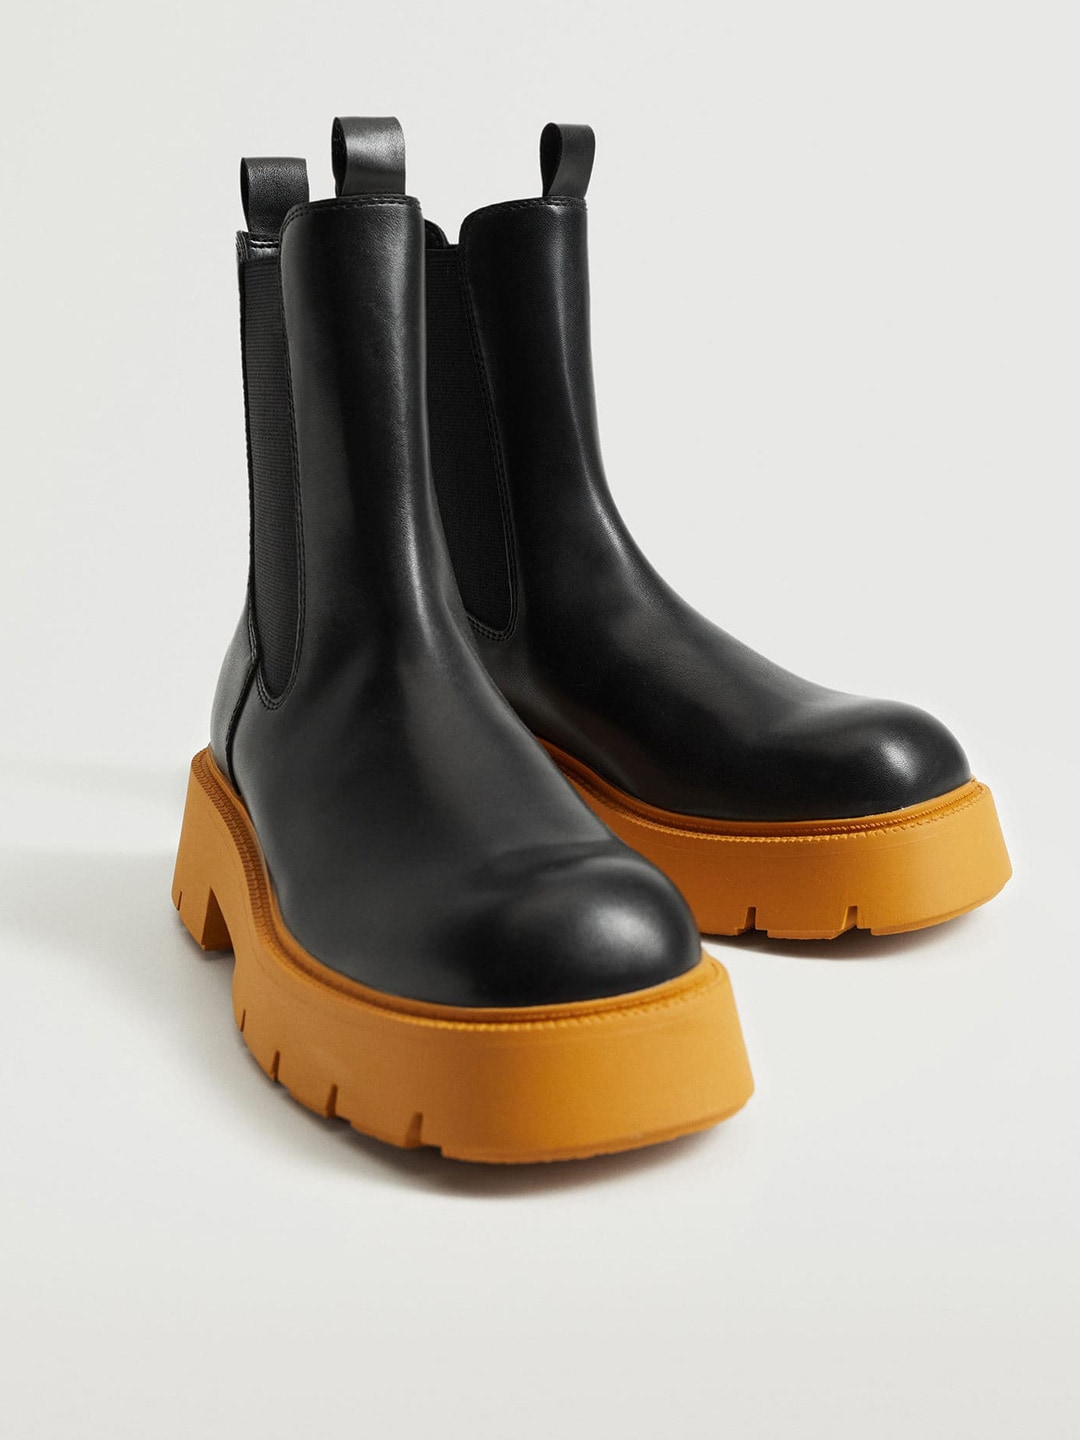 MANGO Women Black & Mustard Yellow Solid High-Top Chelsea Boots Price in India